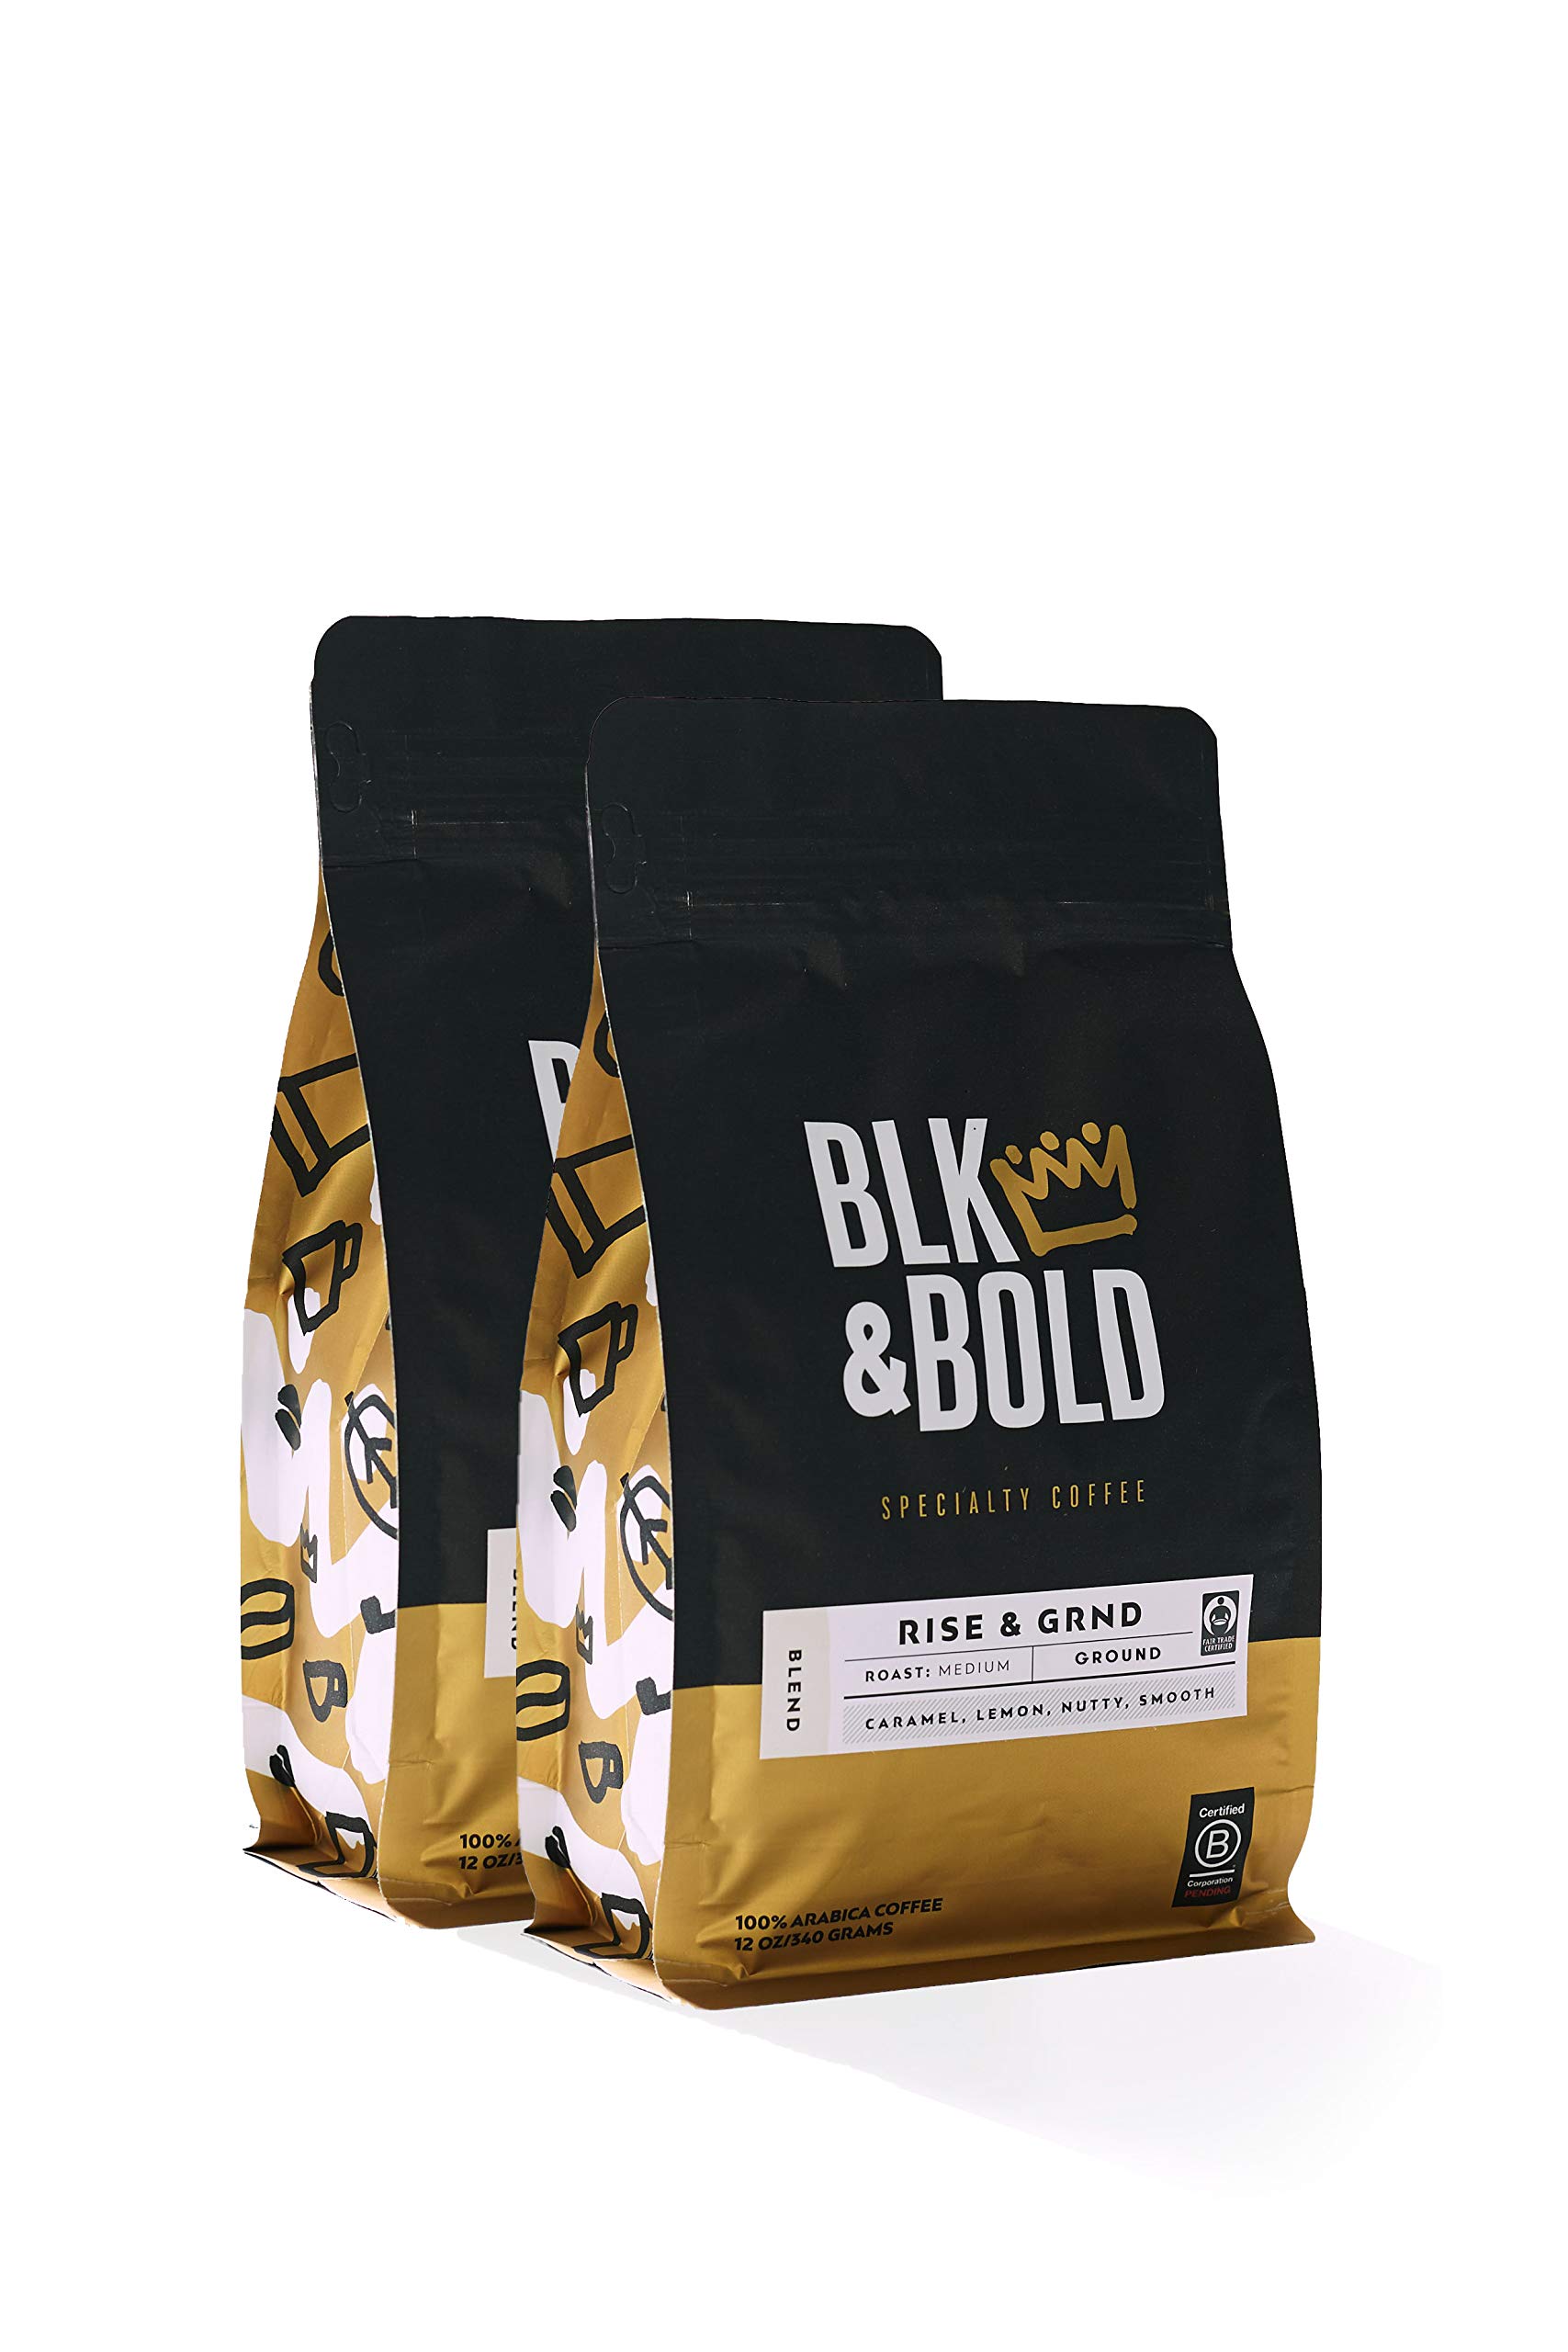 BLK & Bold Coffee Review